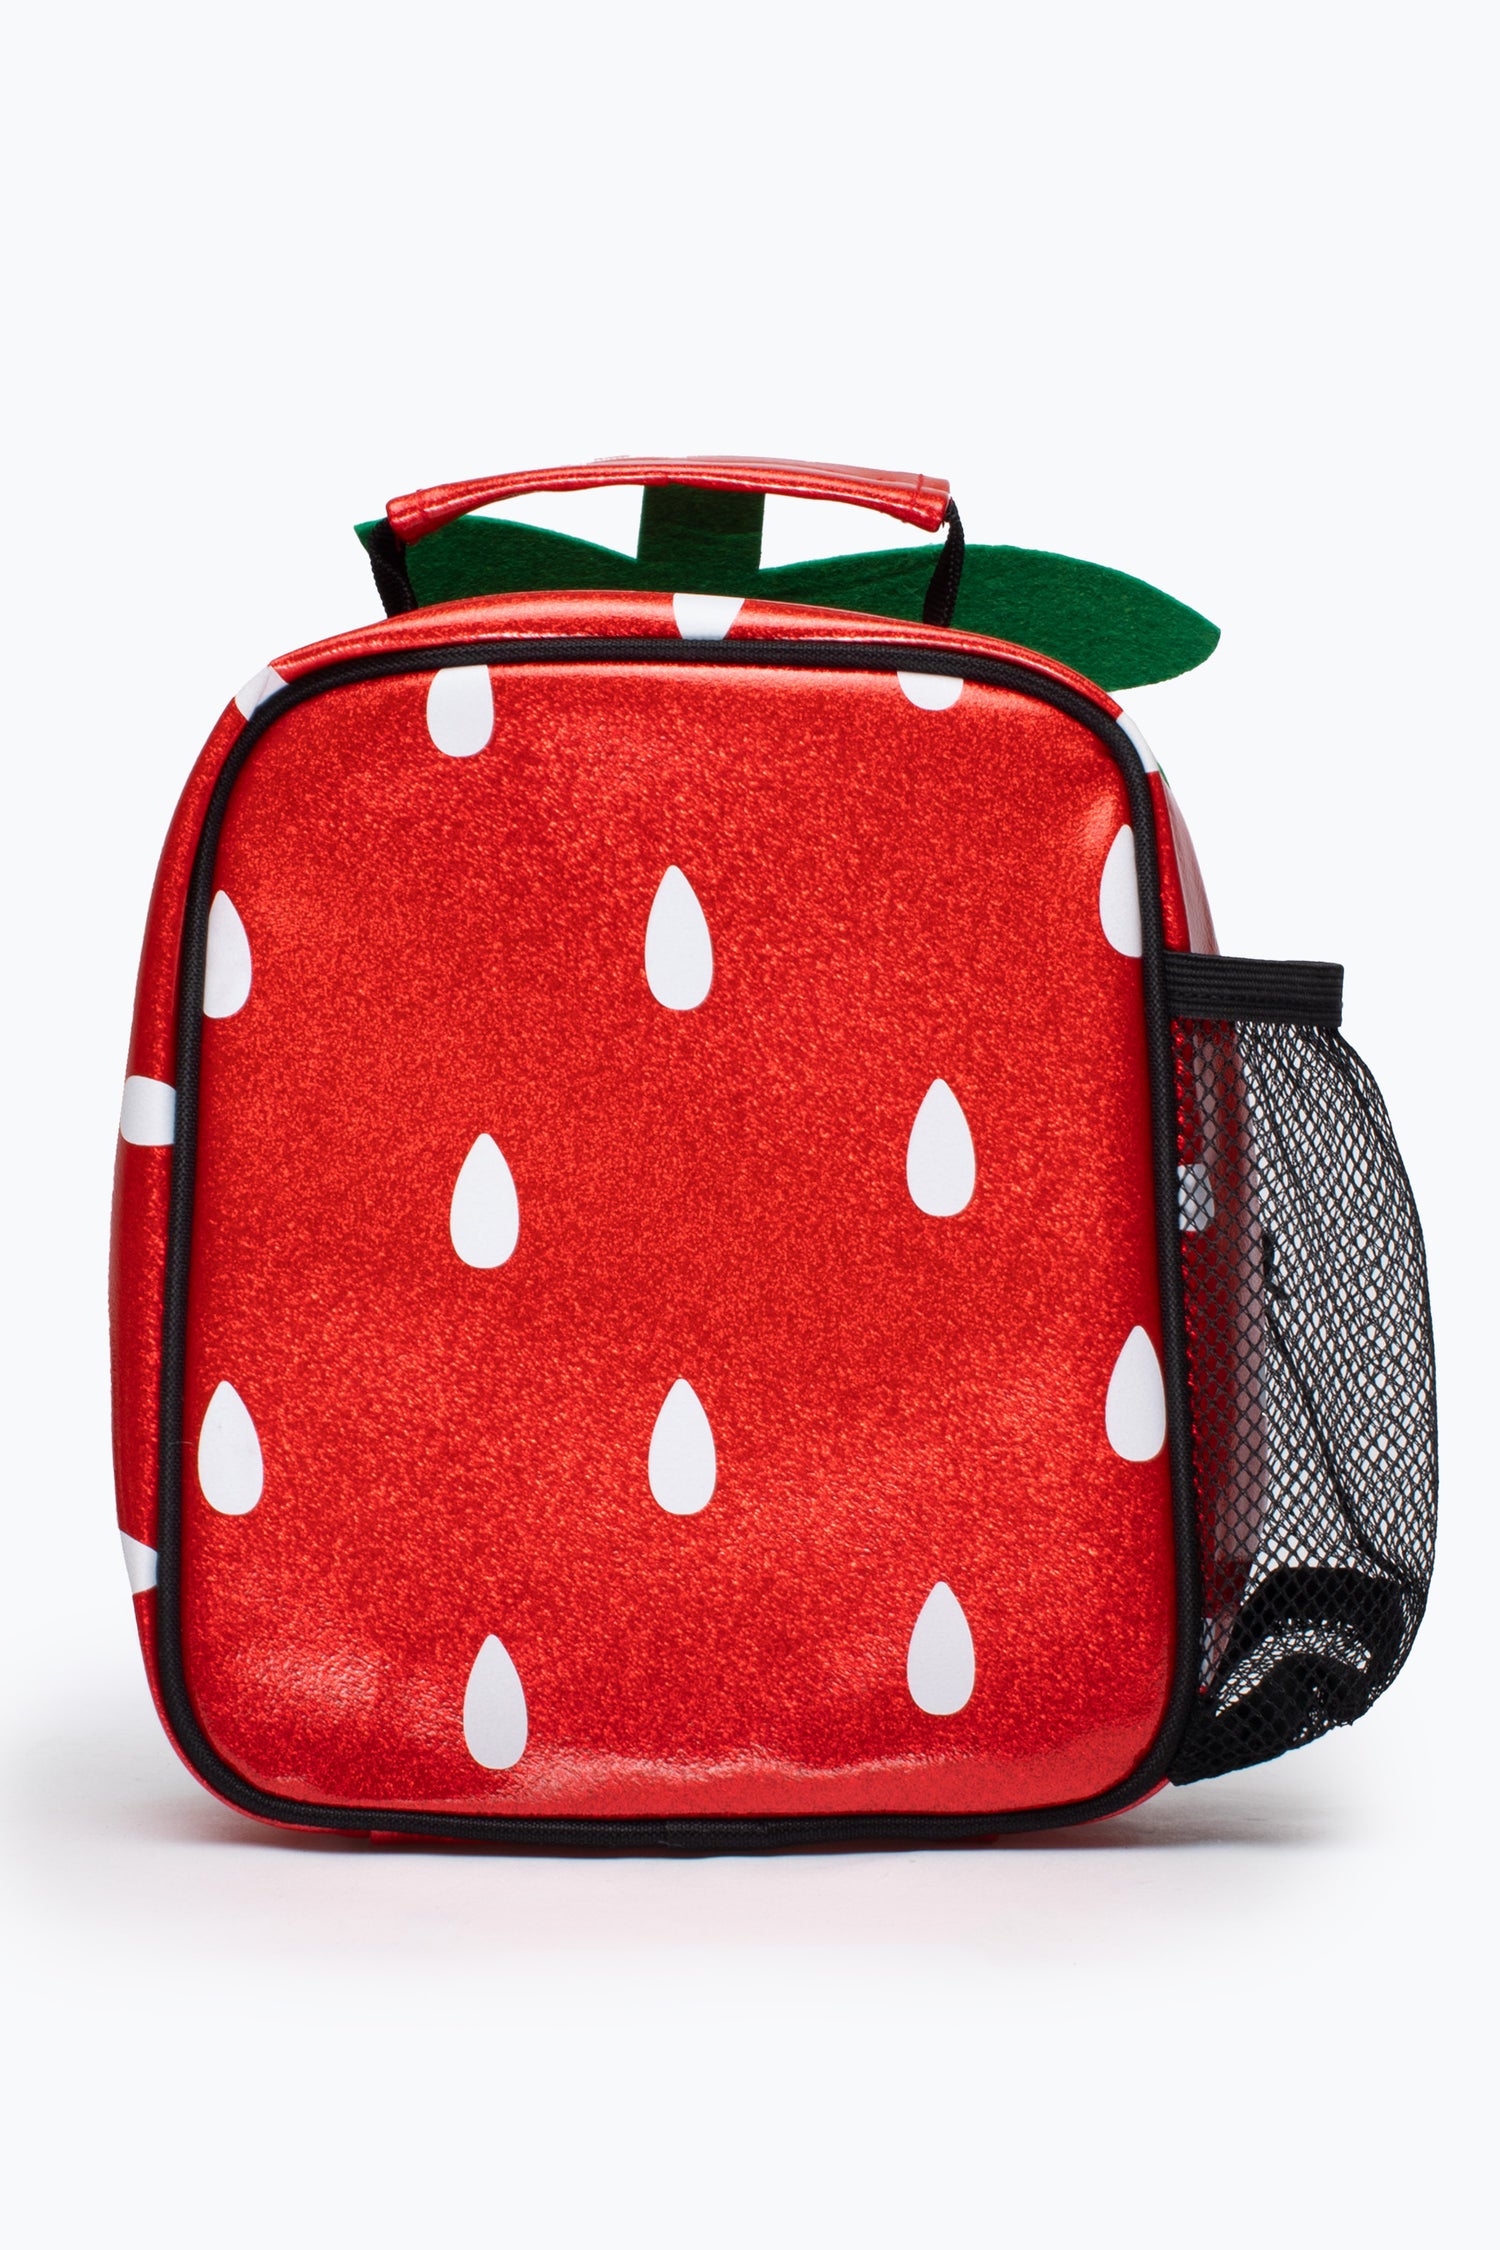 HYPE UNISEX RED STRAWBERRY LUNCH BOX